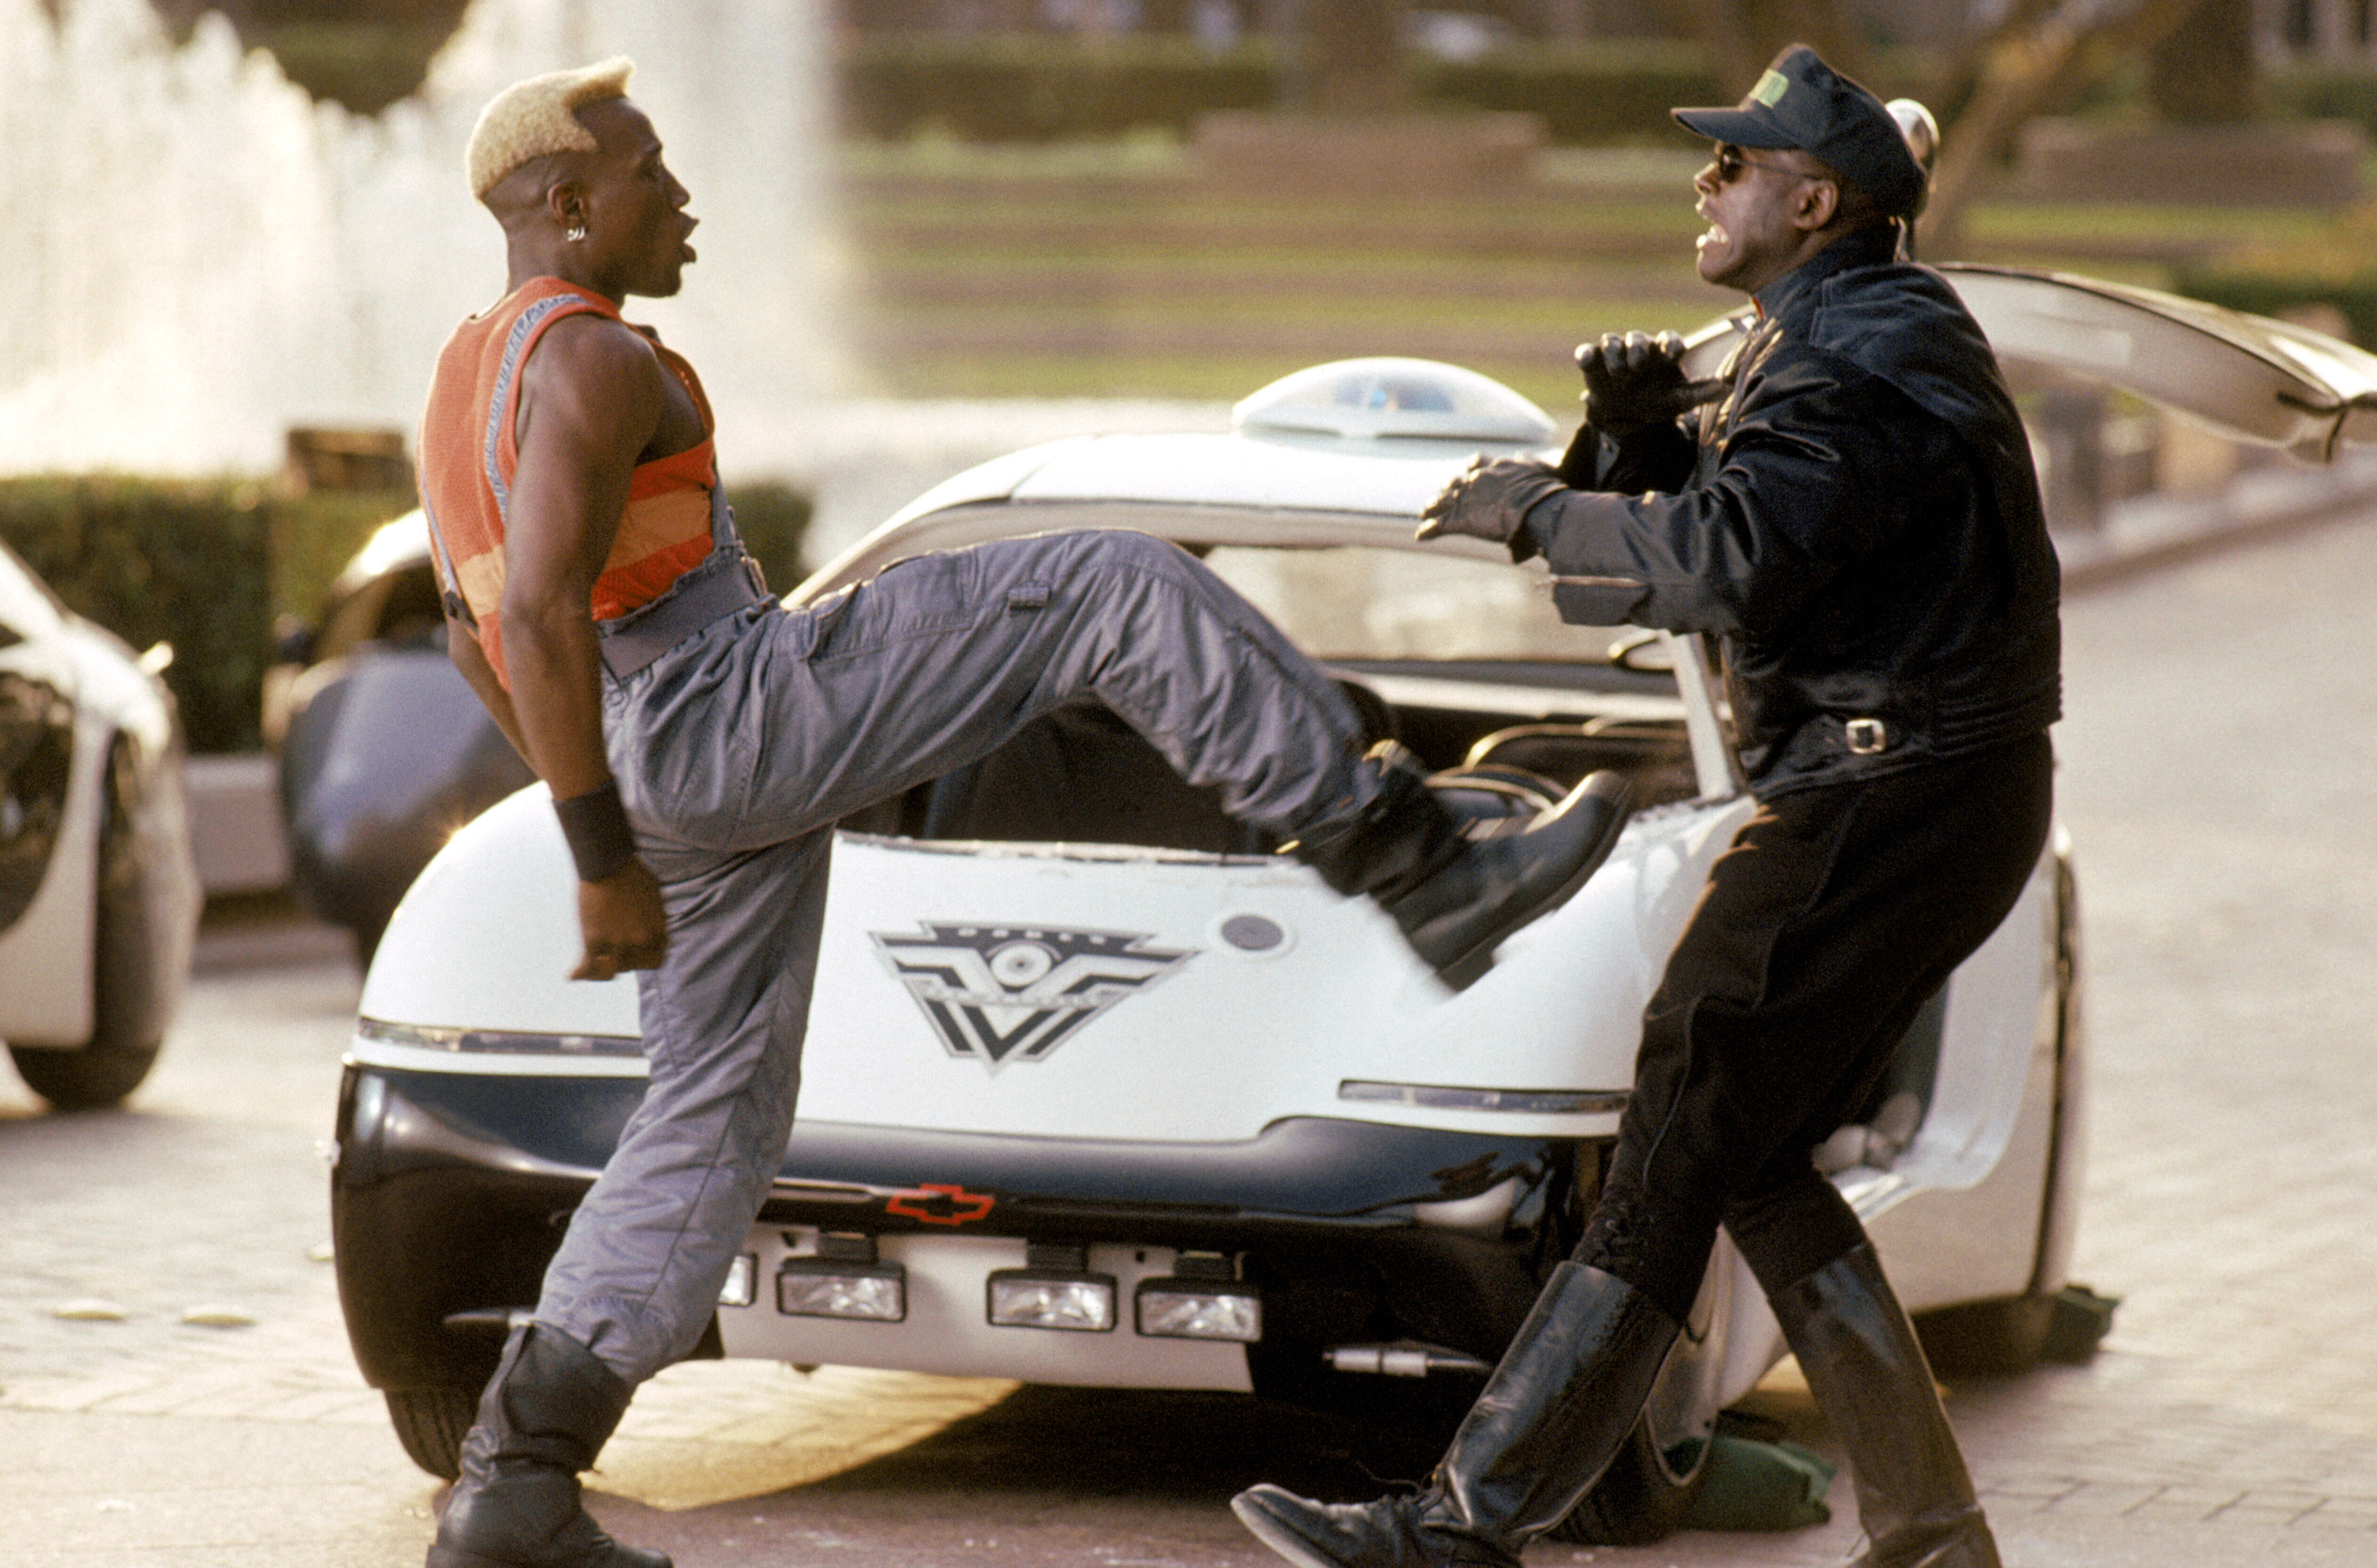 Snipes as Phoenix kicking at a police officer